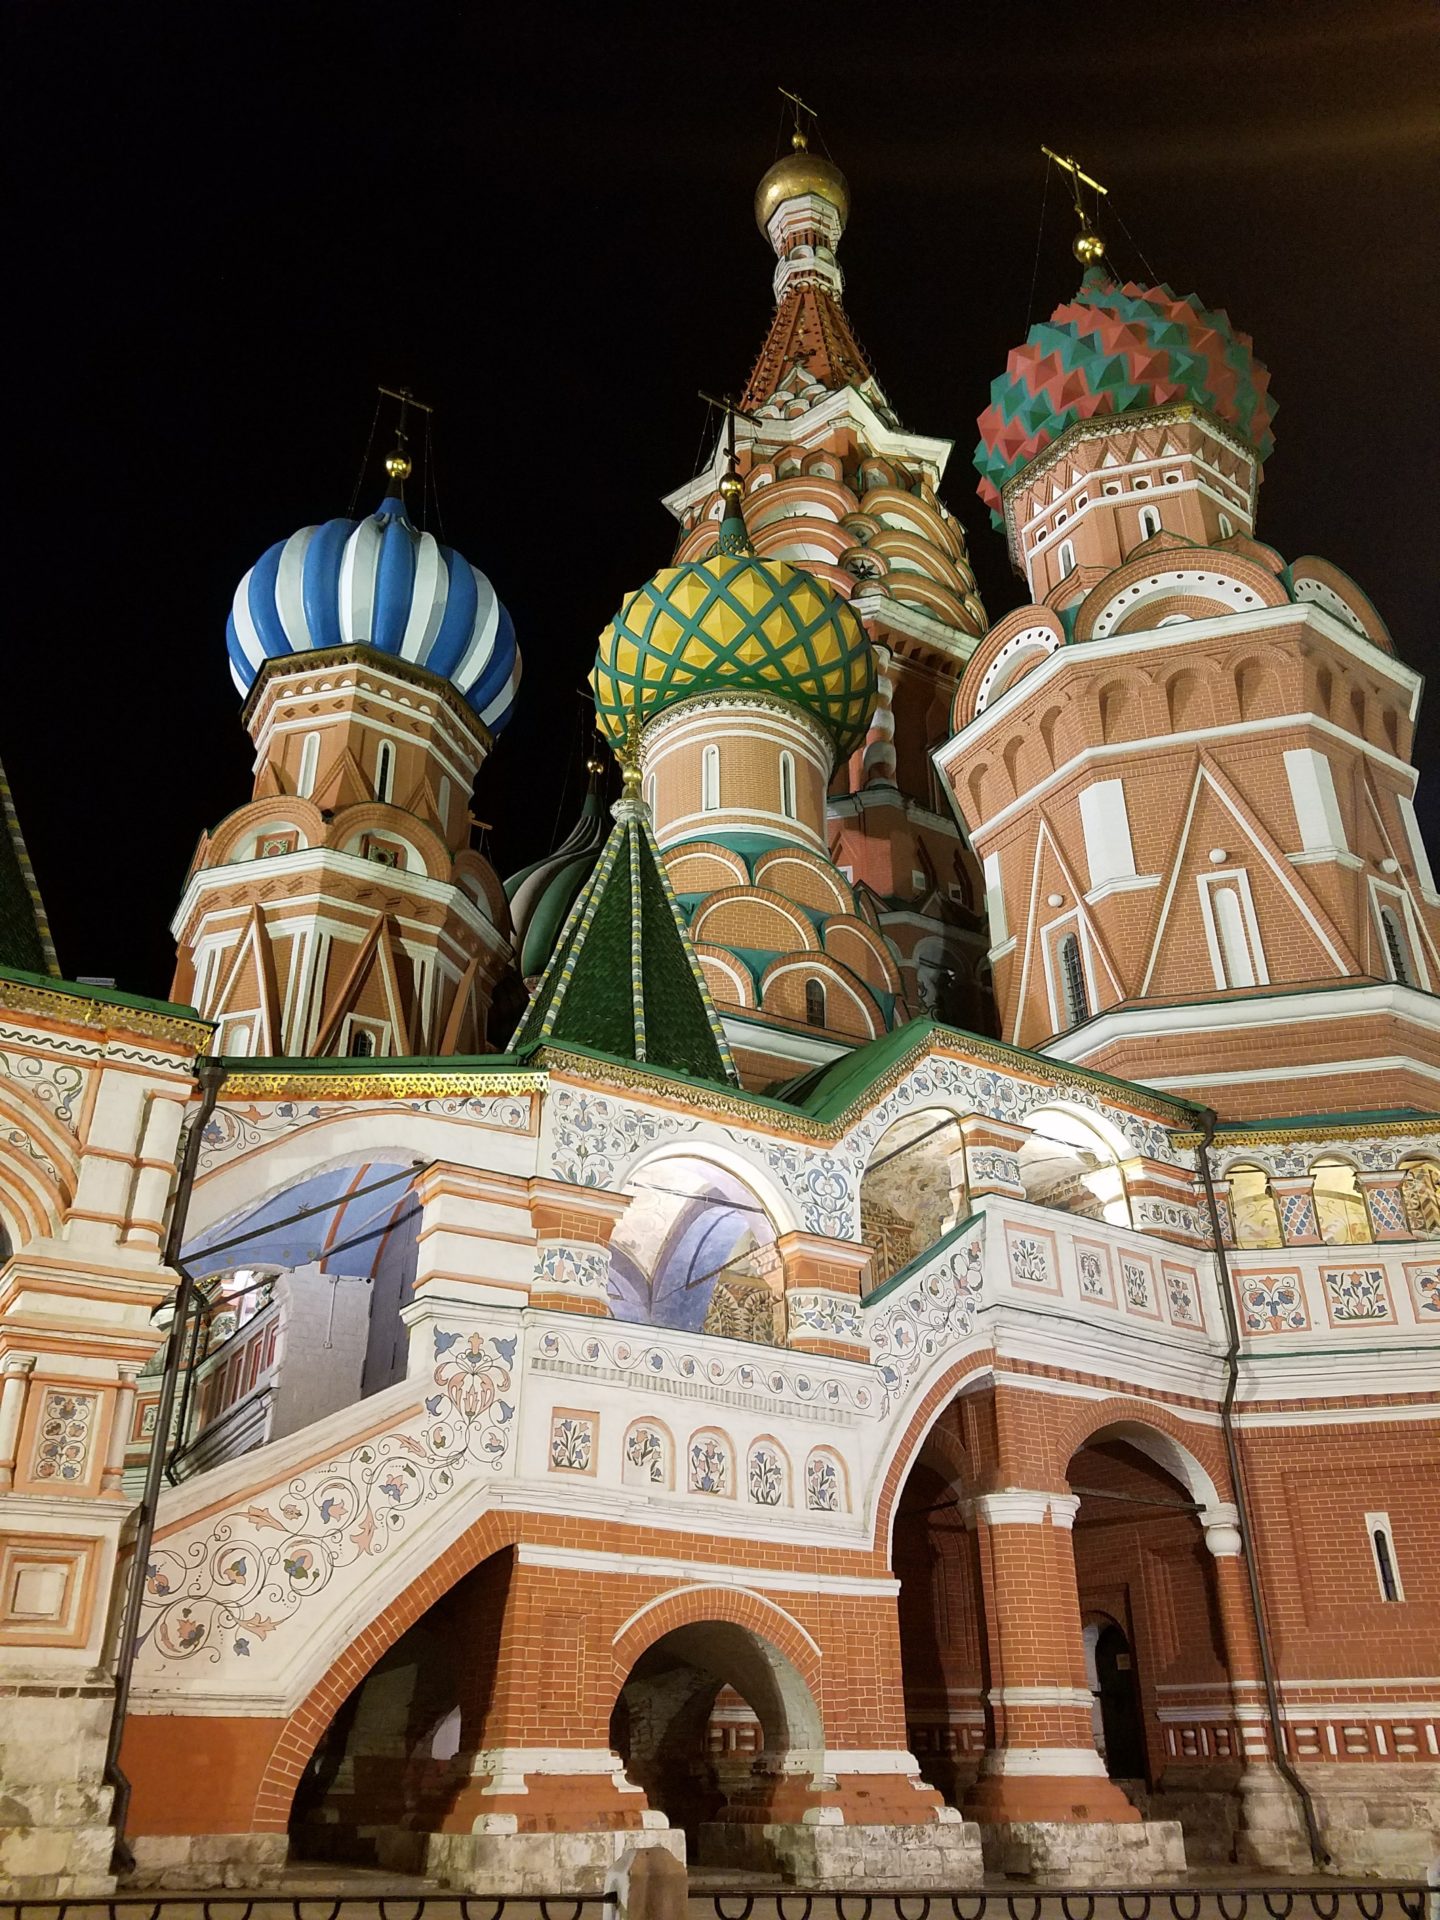 a building with colorful domes